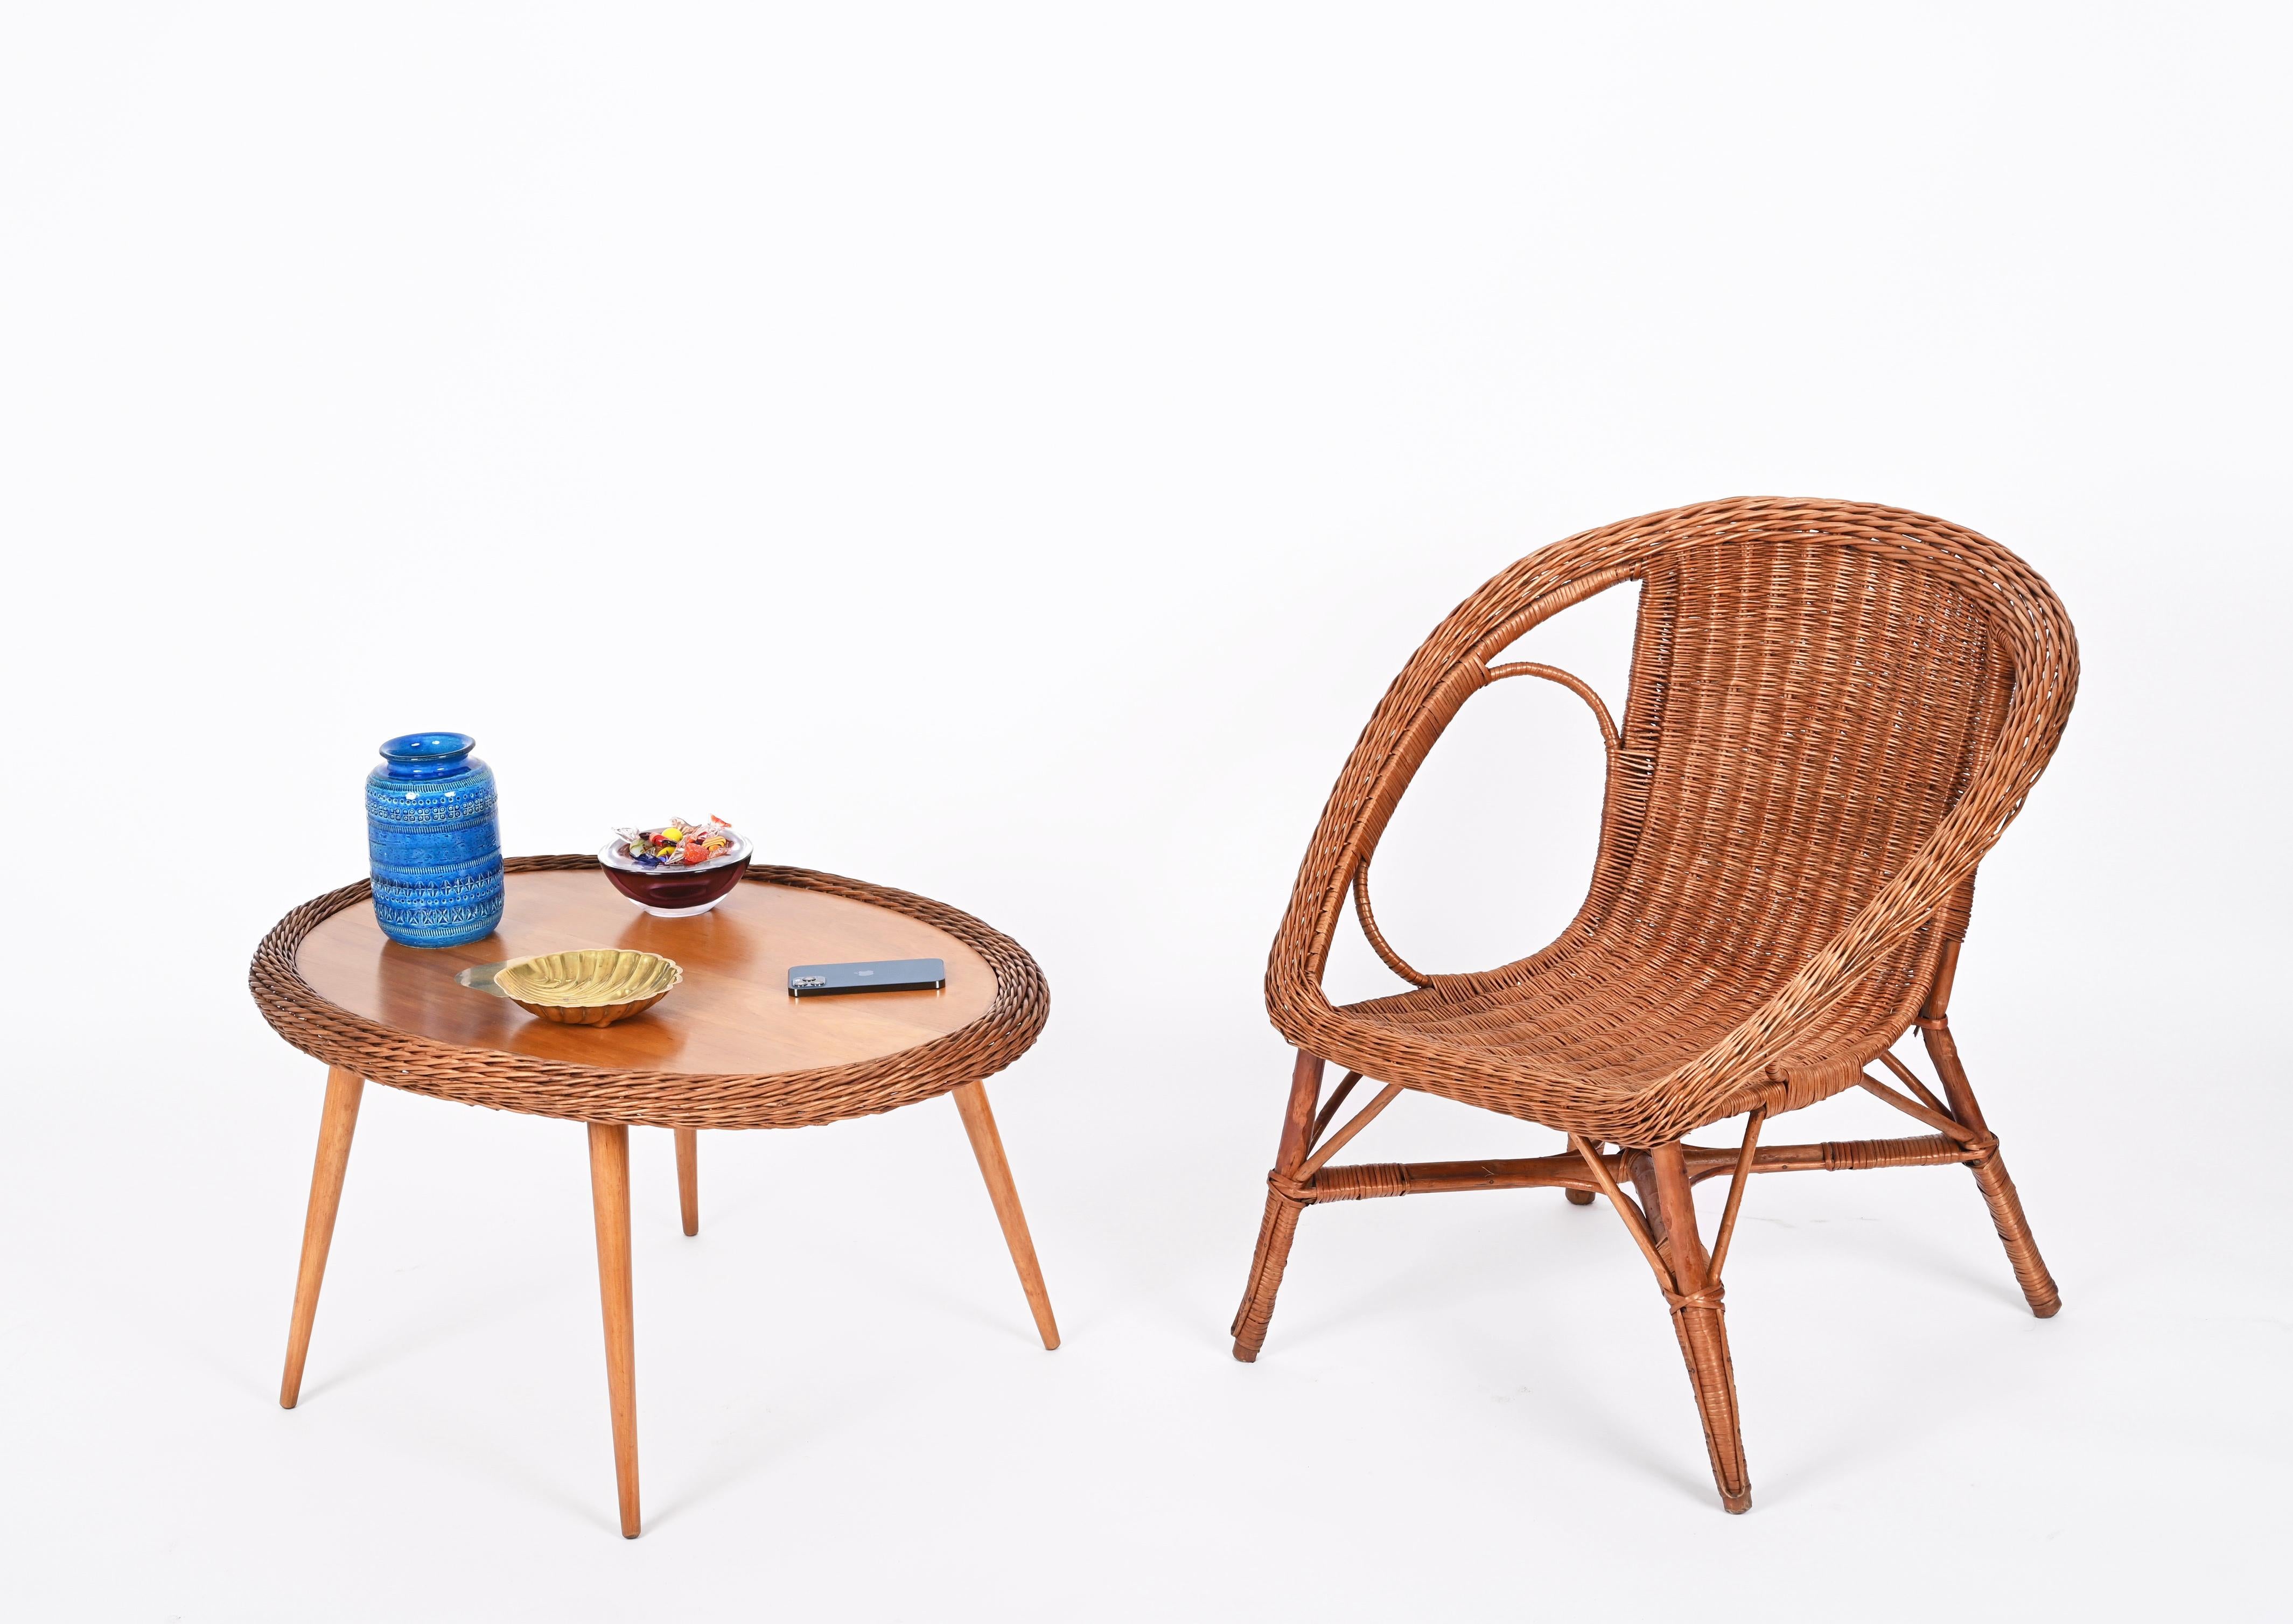 Fabulous midcentury wicker and wood table and chair set. This fantastic set is in the style of Tony Paul and made in Italy in the 60s.

This unique set consists of three armchairs in hand-woven wicker and an oval coffee table that features a top